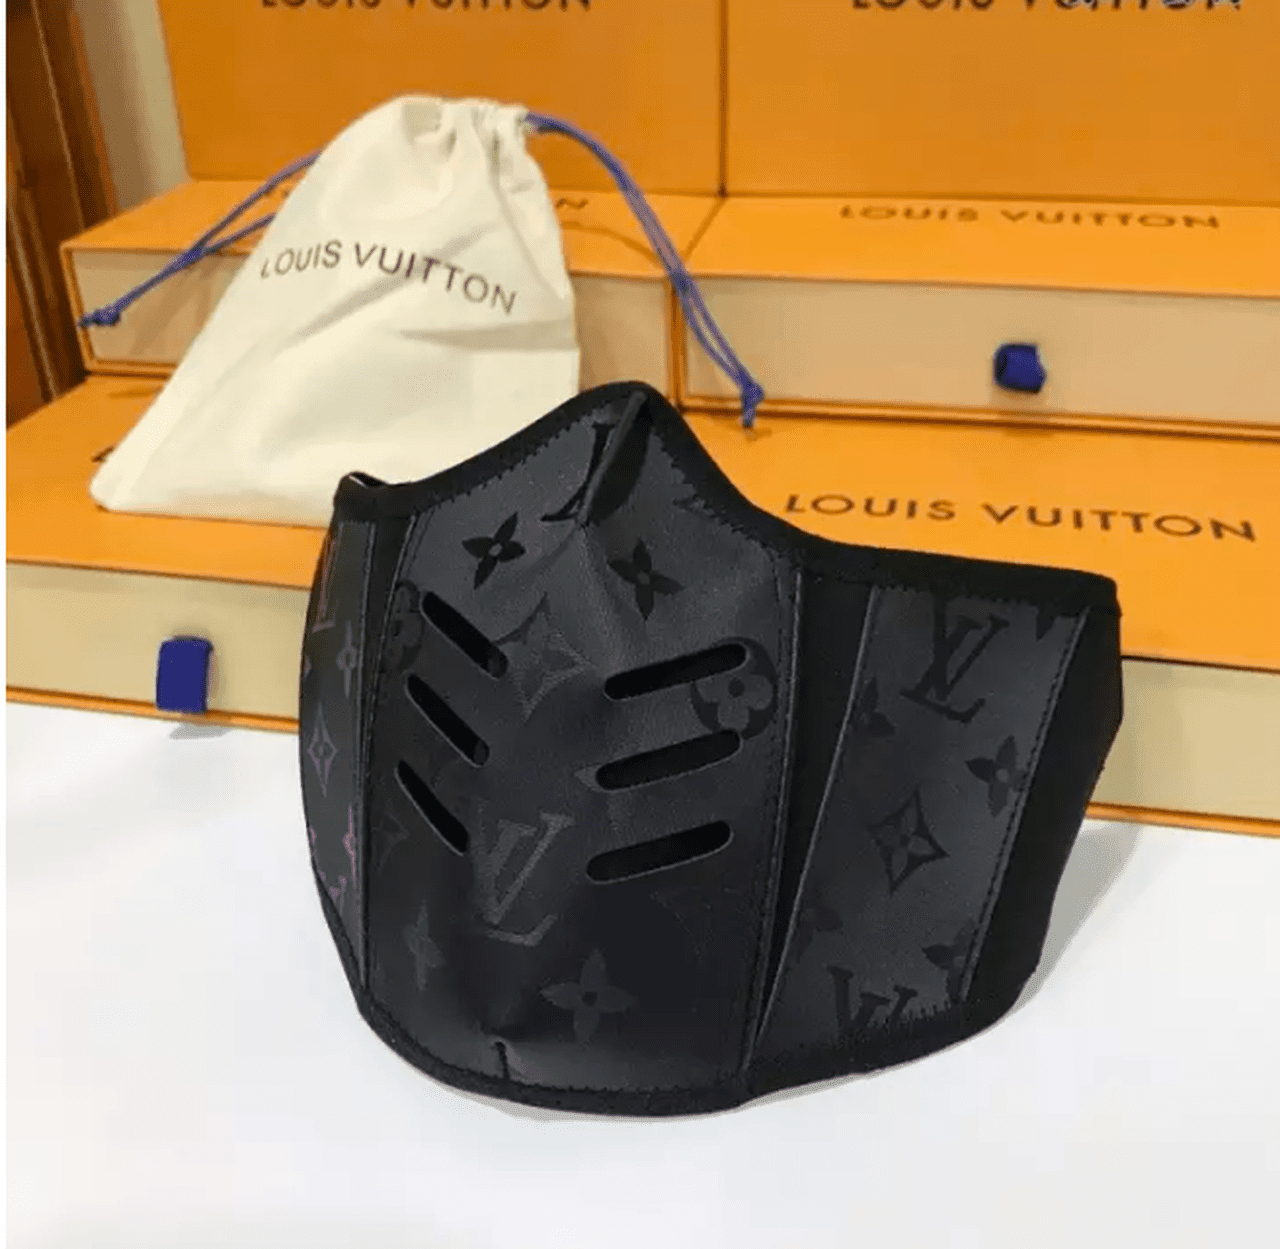 Louis Vuitton 2 Damier with Veg Tan Leather Face mask use together